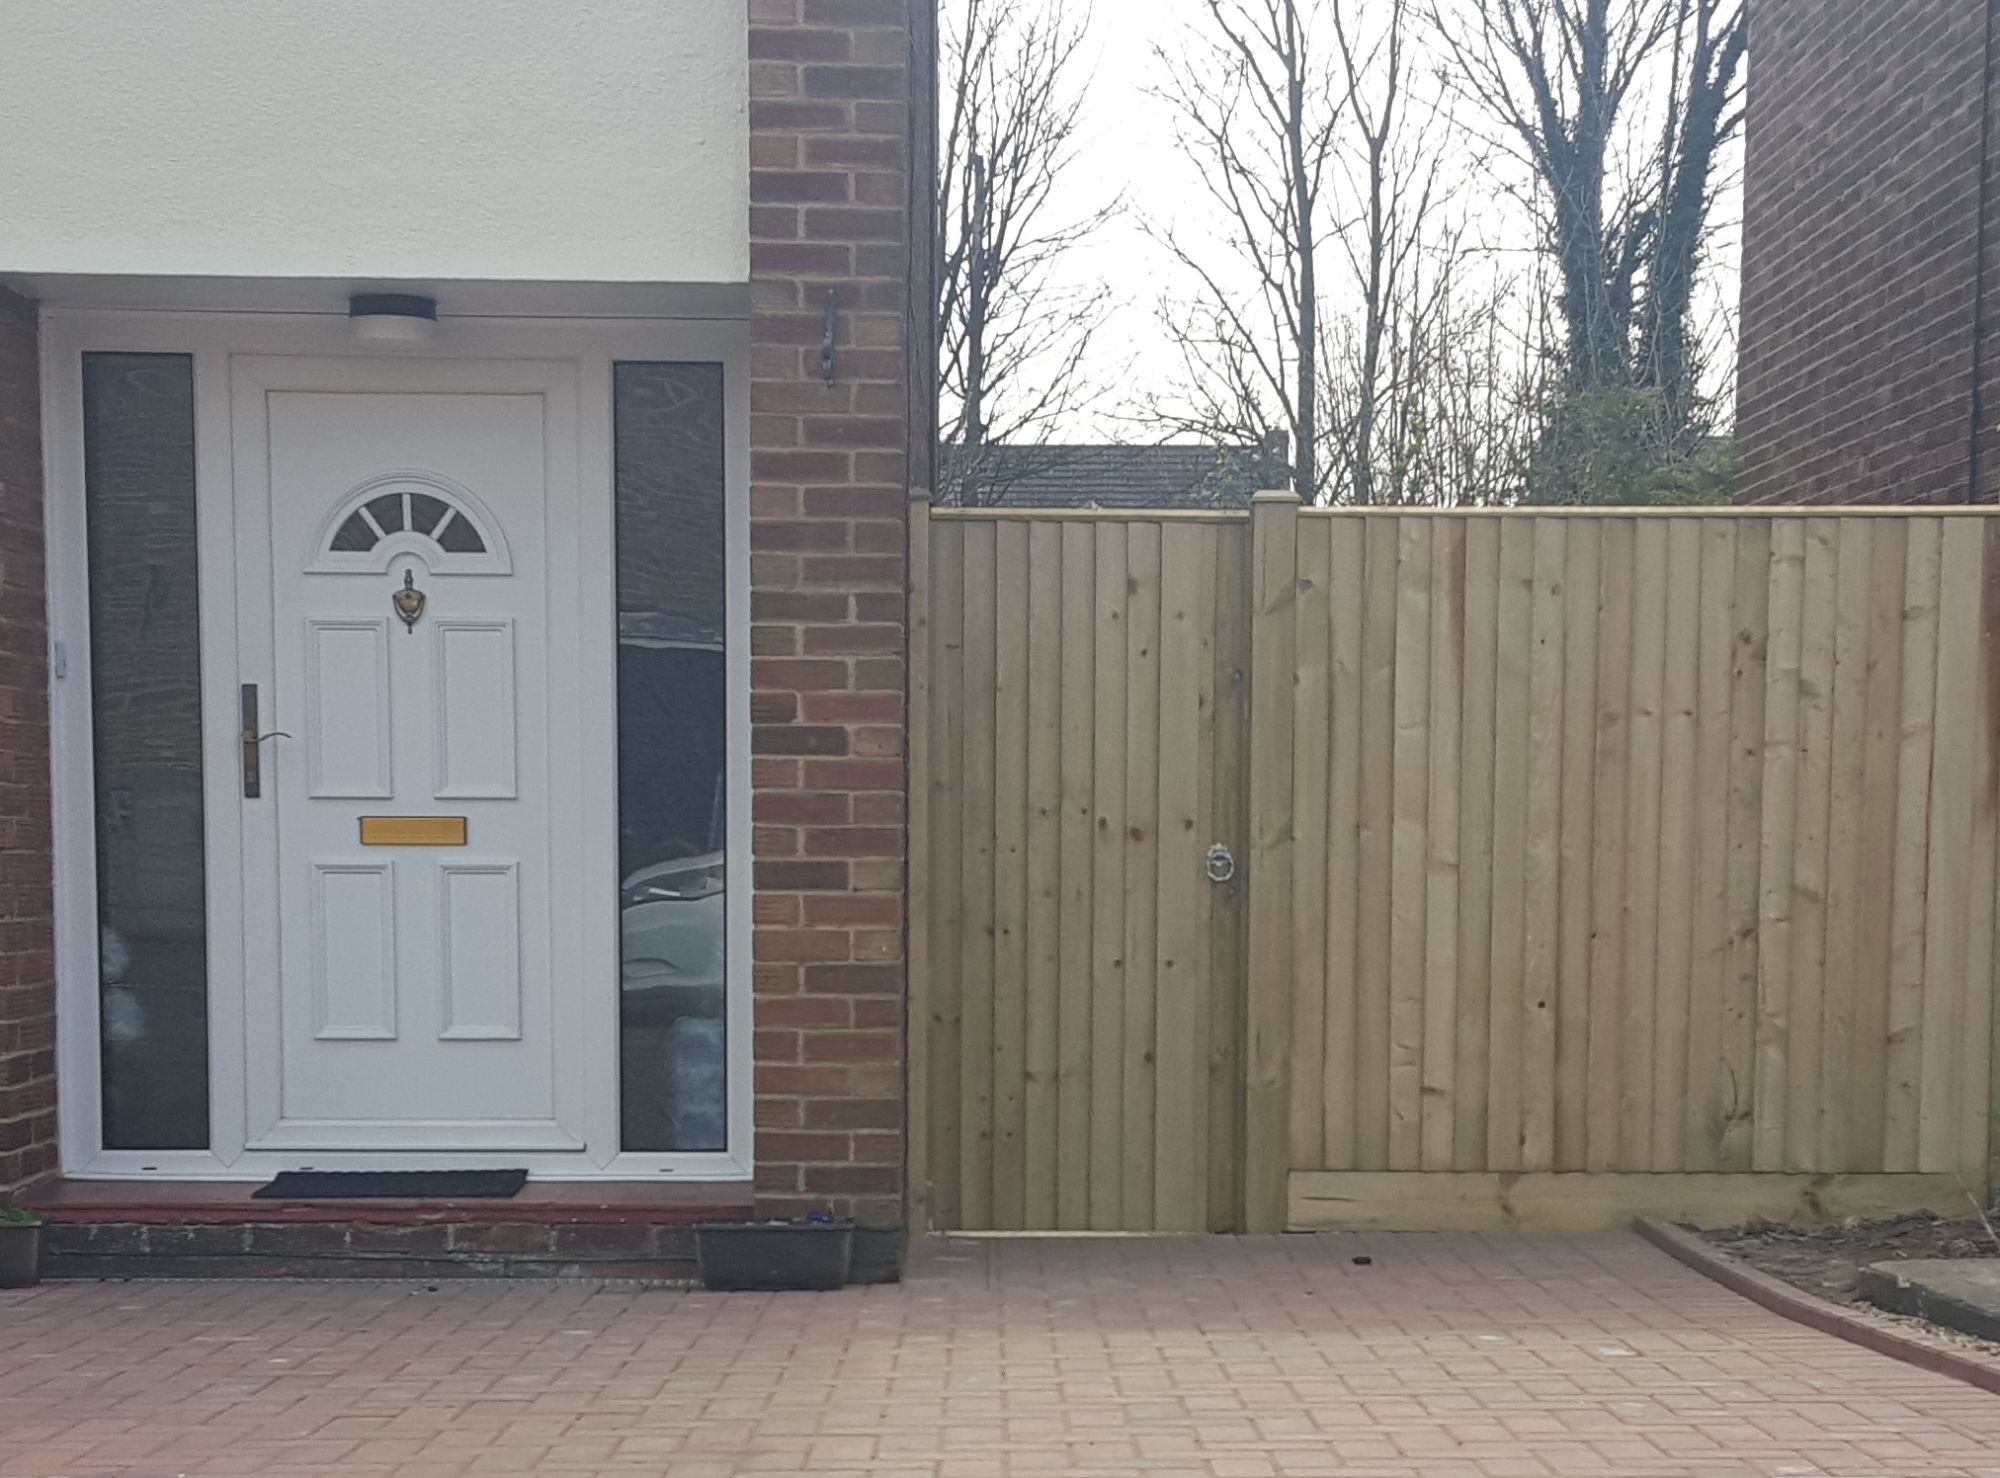 CLOSE BOARD GATE AND FENCE.jpg